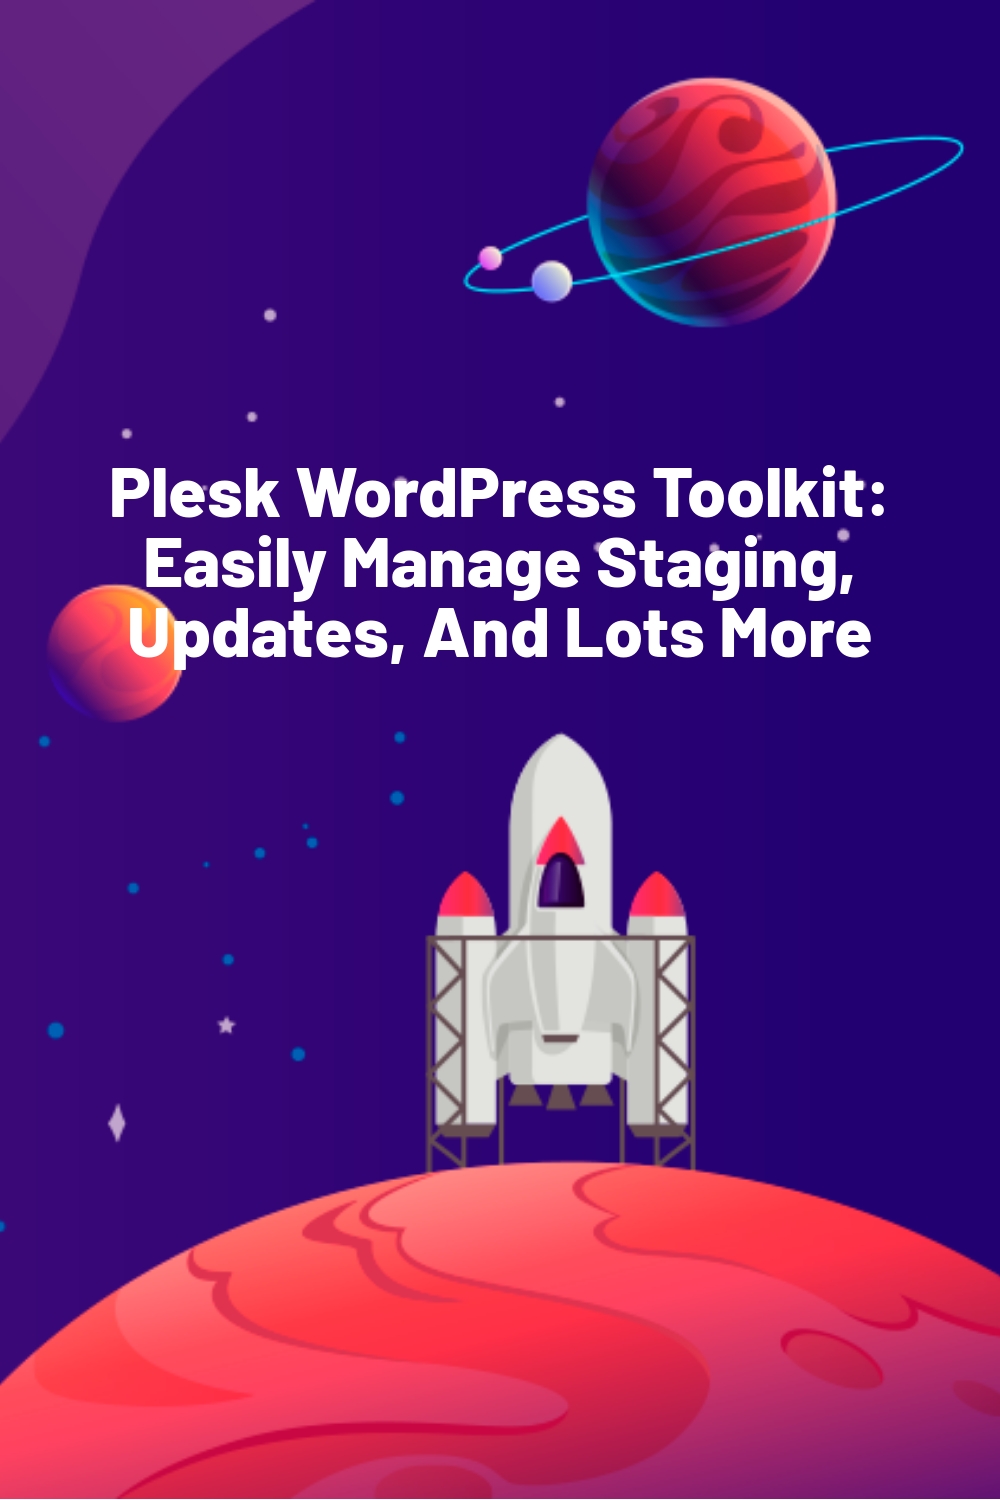 Plesk WordPress Toolkit: Easily Manage Staging, Updates, And Lots More